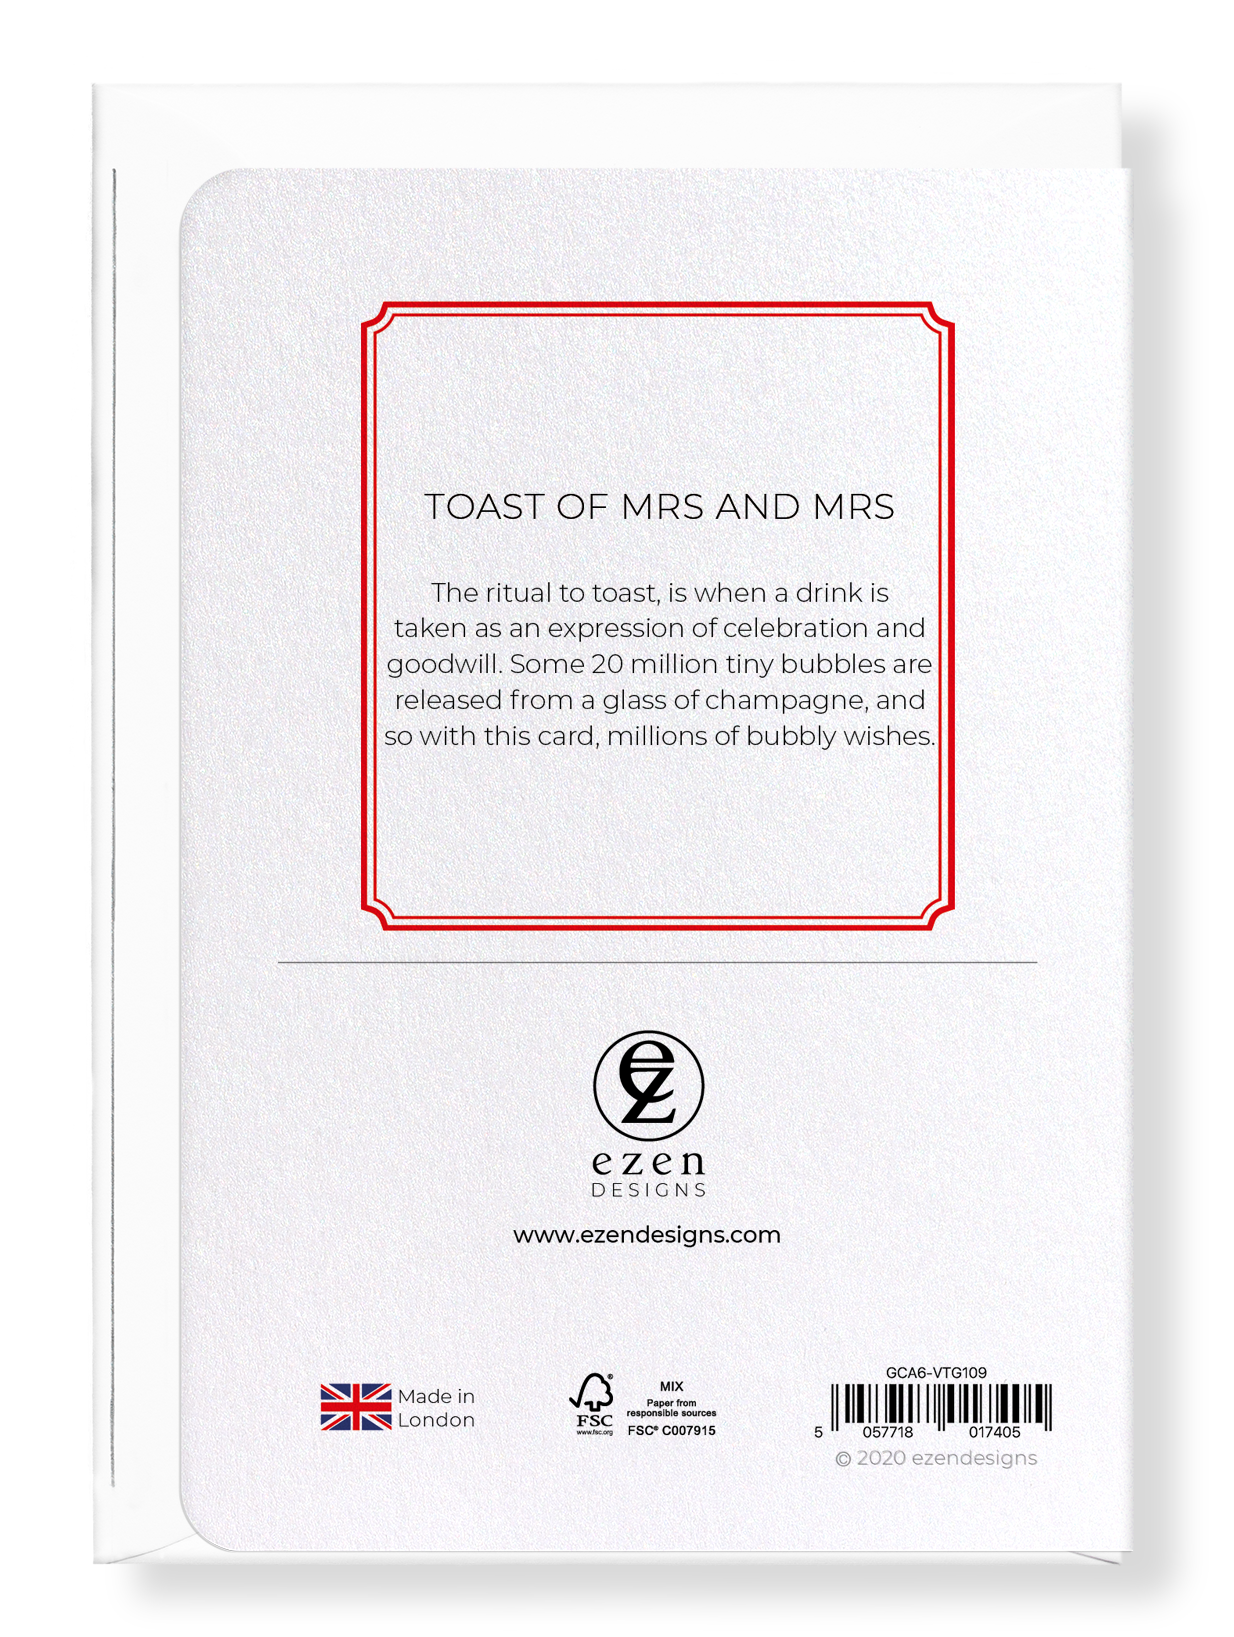 Ezen Designs - Toast of mrs and mrs - Greeting Card - Back